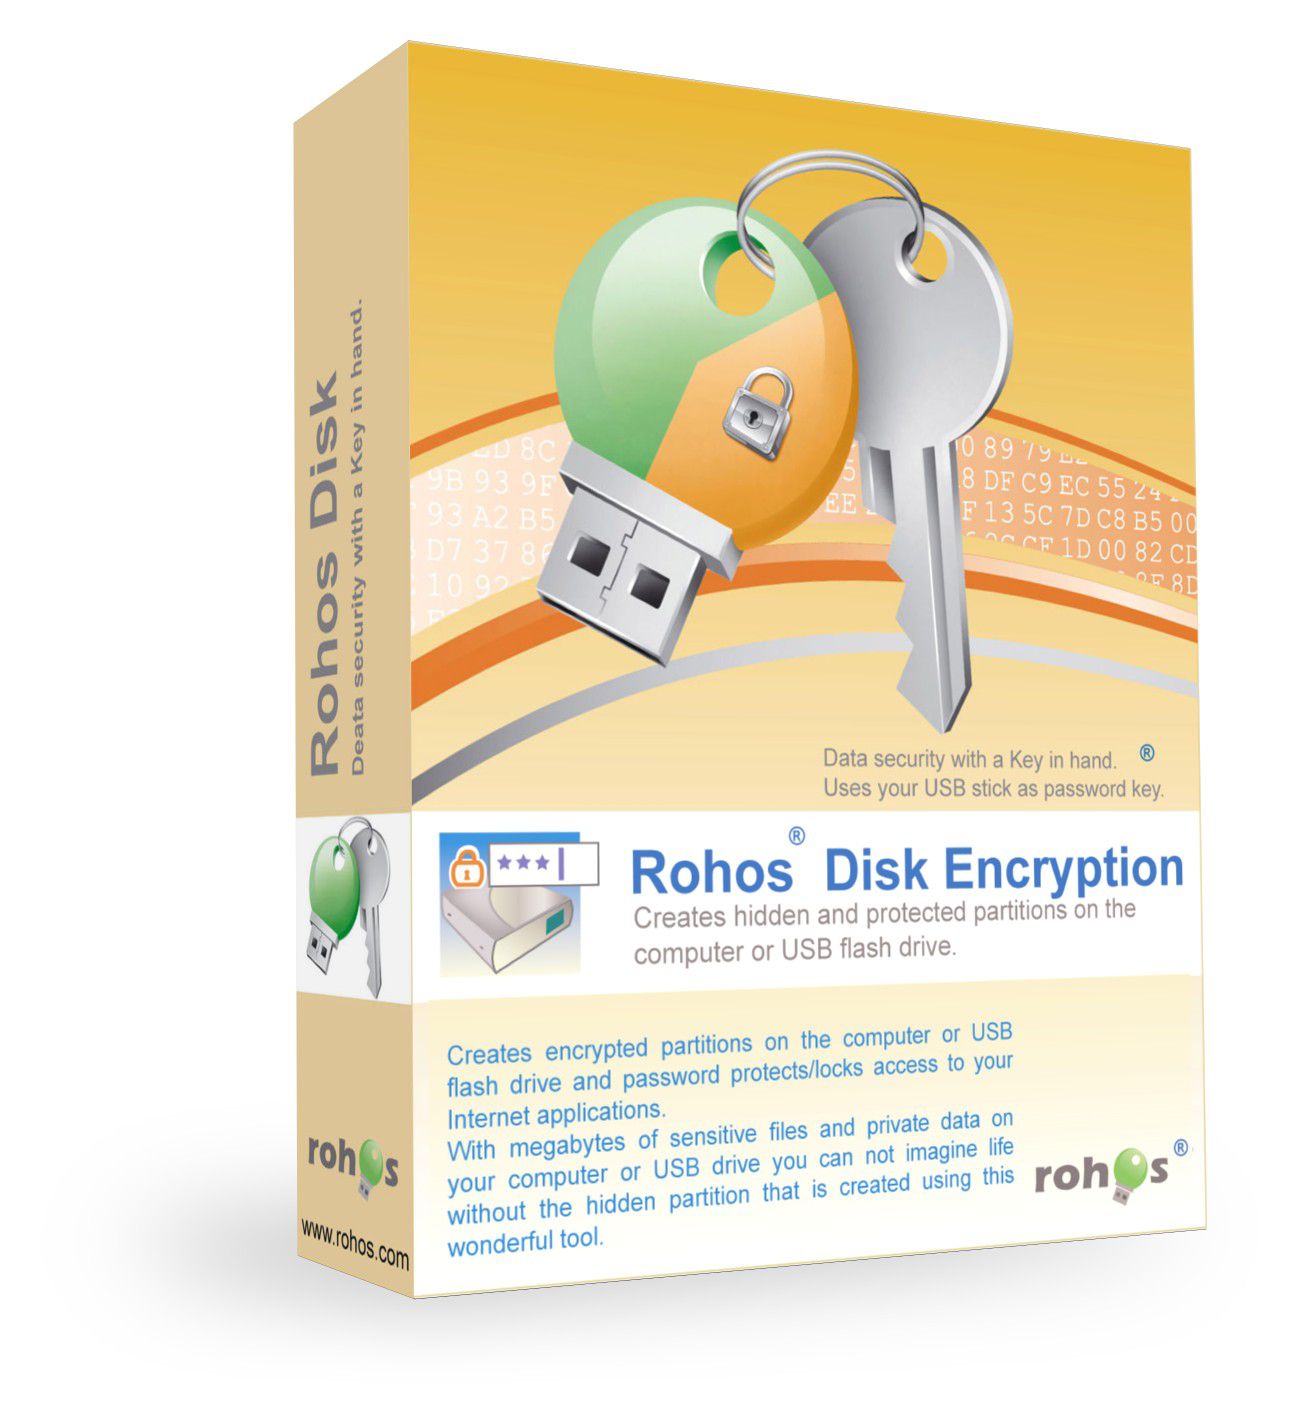 download the new version for apple Rohos Disk Encryption 3.3